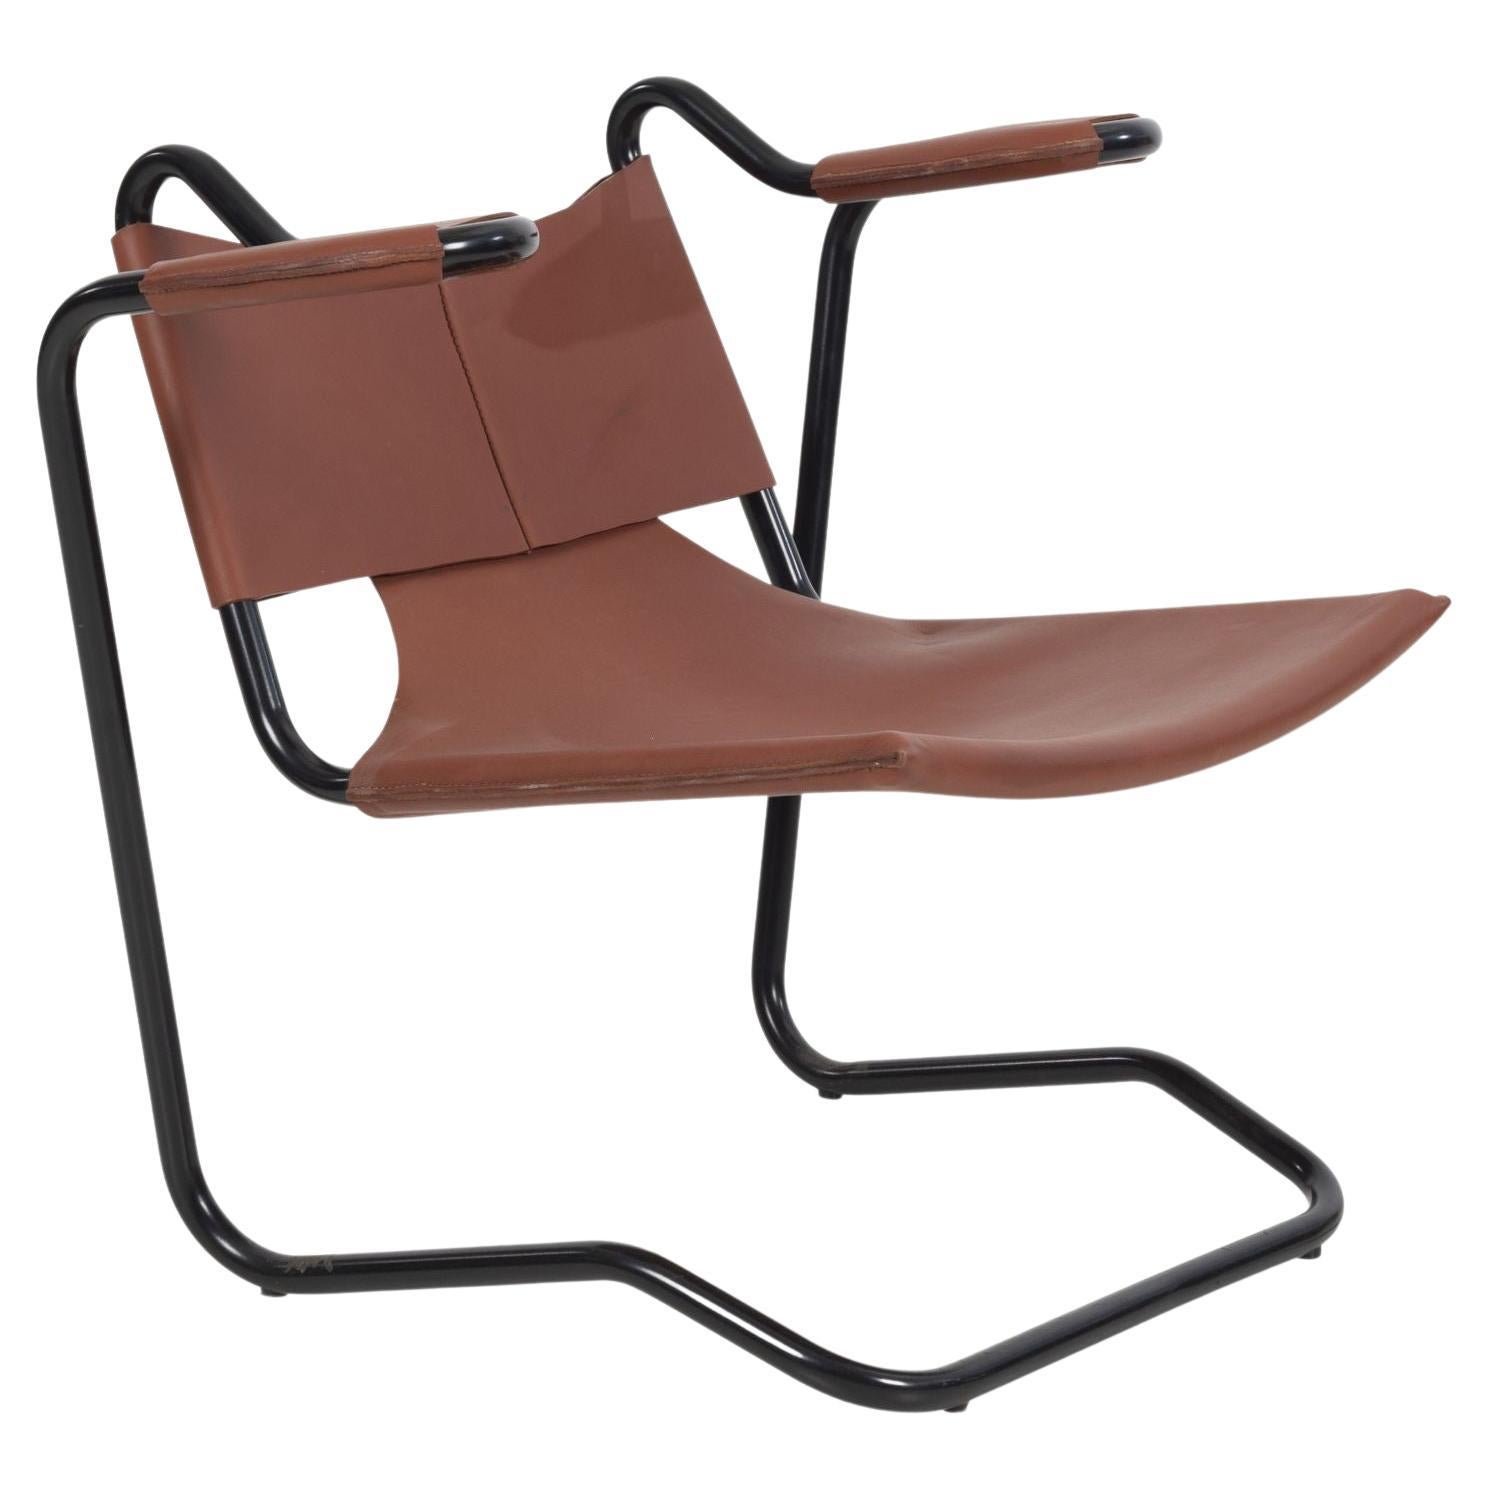 Dan Johnson Leather Sling Chair For Sale